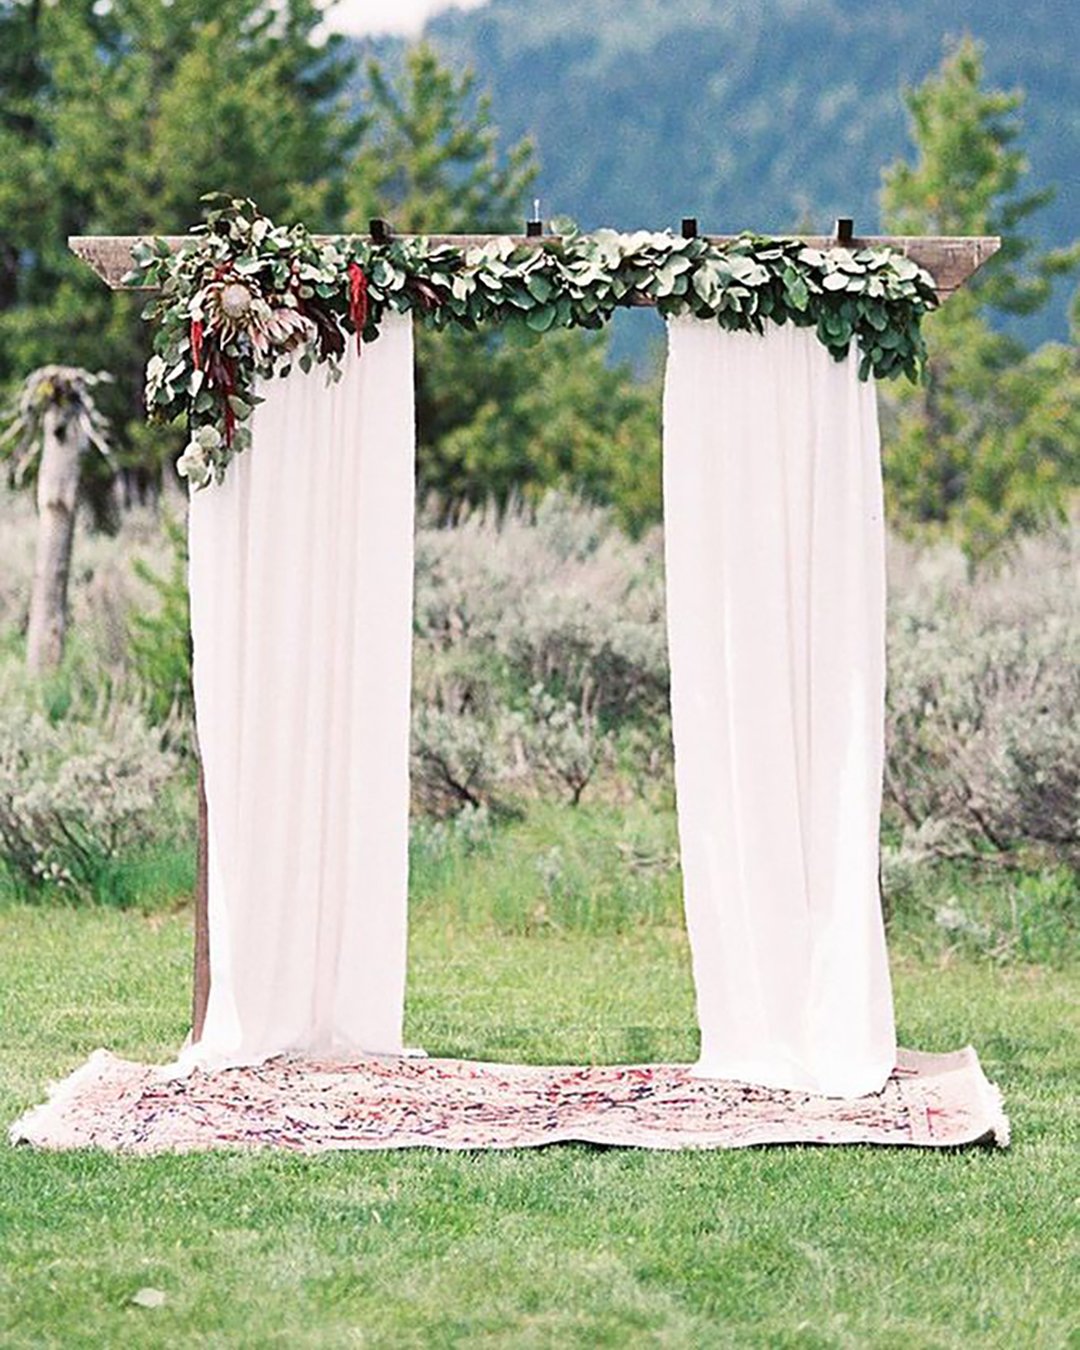 rustic wedding décor wooden arch decorated with greenery and white cloth brie thomason photography